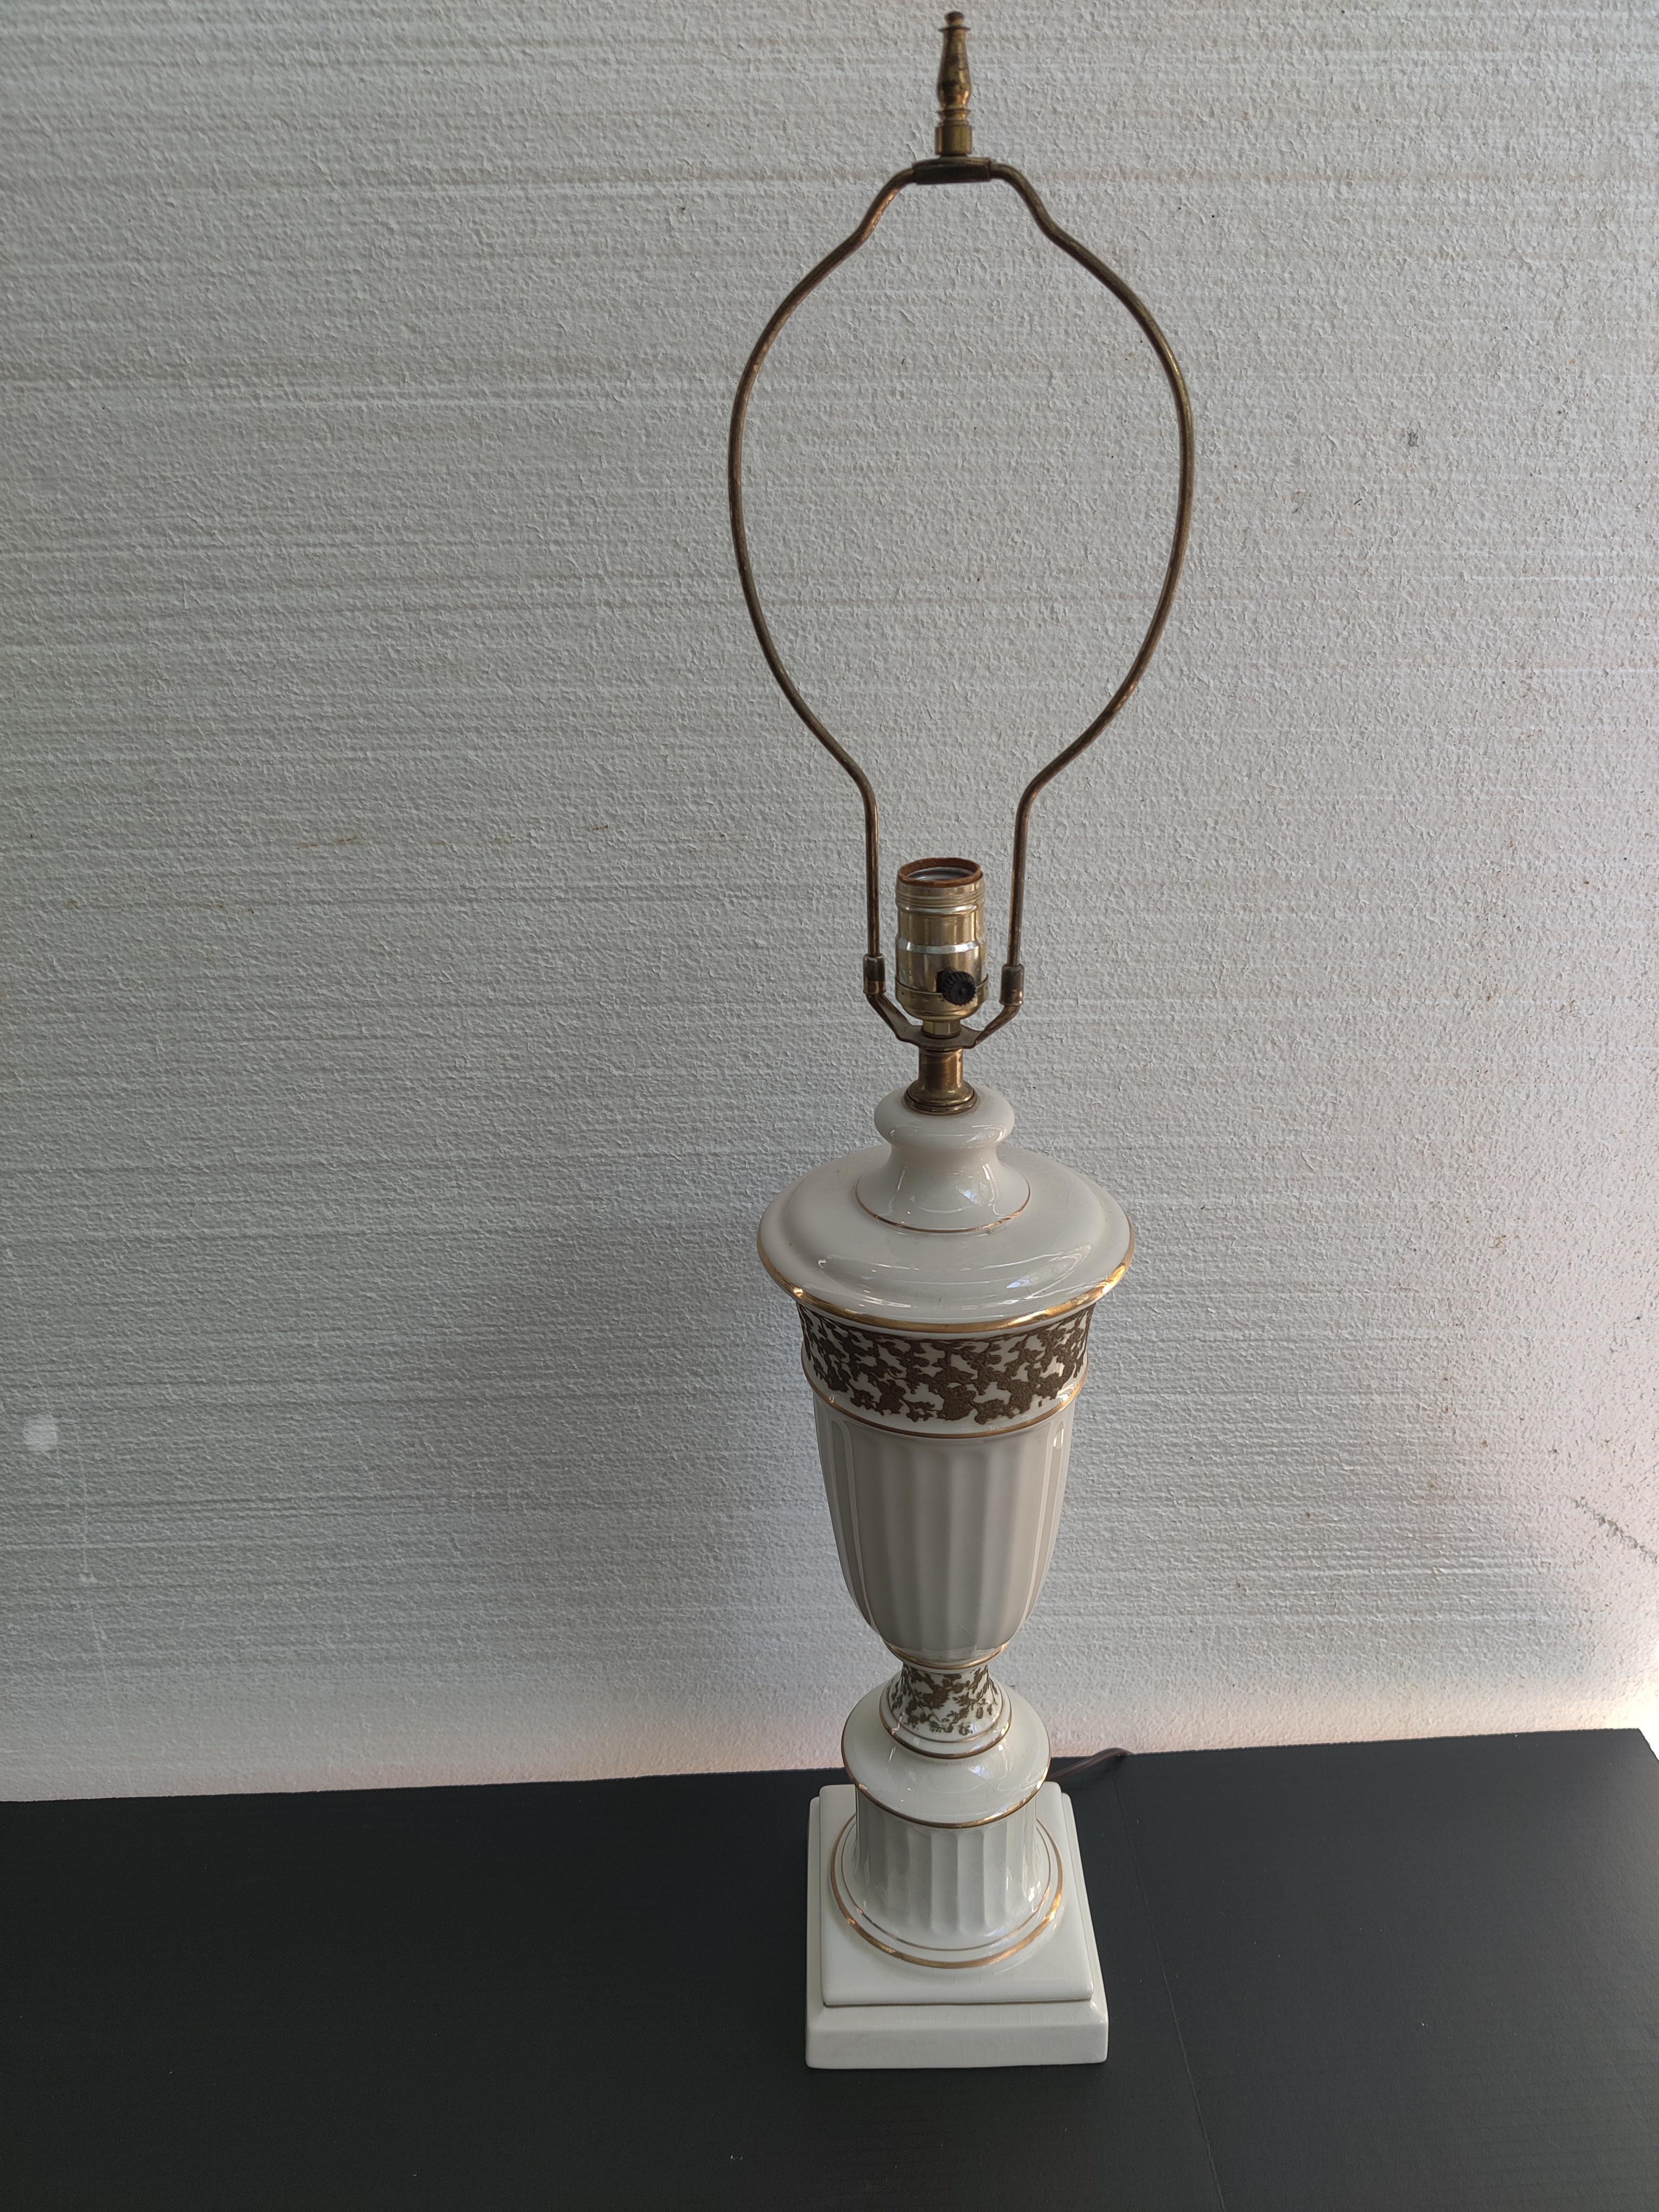 Hollywood Regency Gold Gilt Embossed Trim Ceramic Lamp with finial.
Lamp works.  
Base is 5